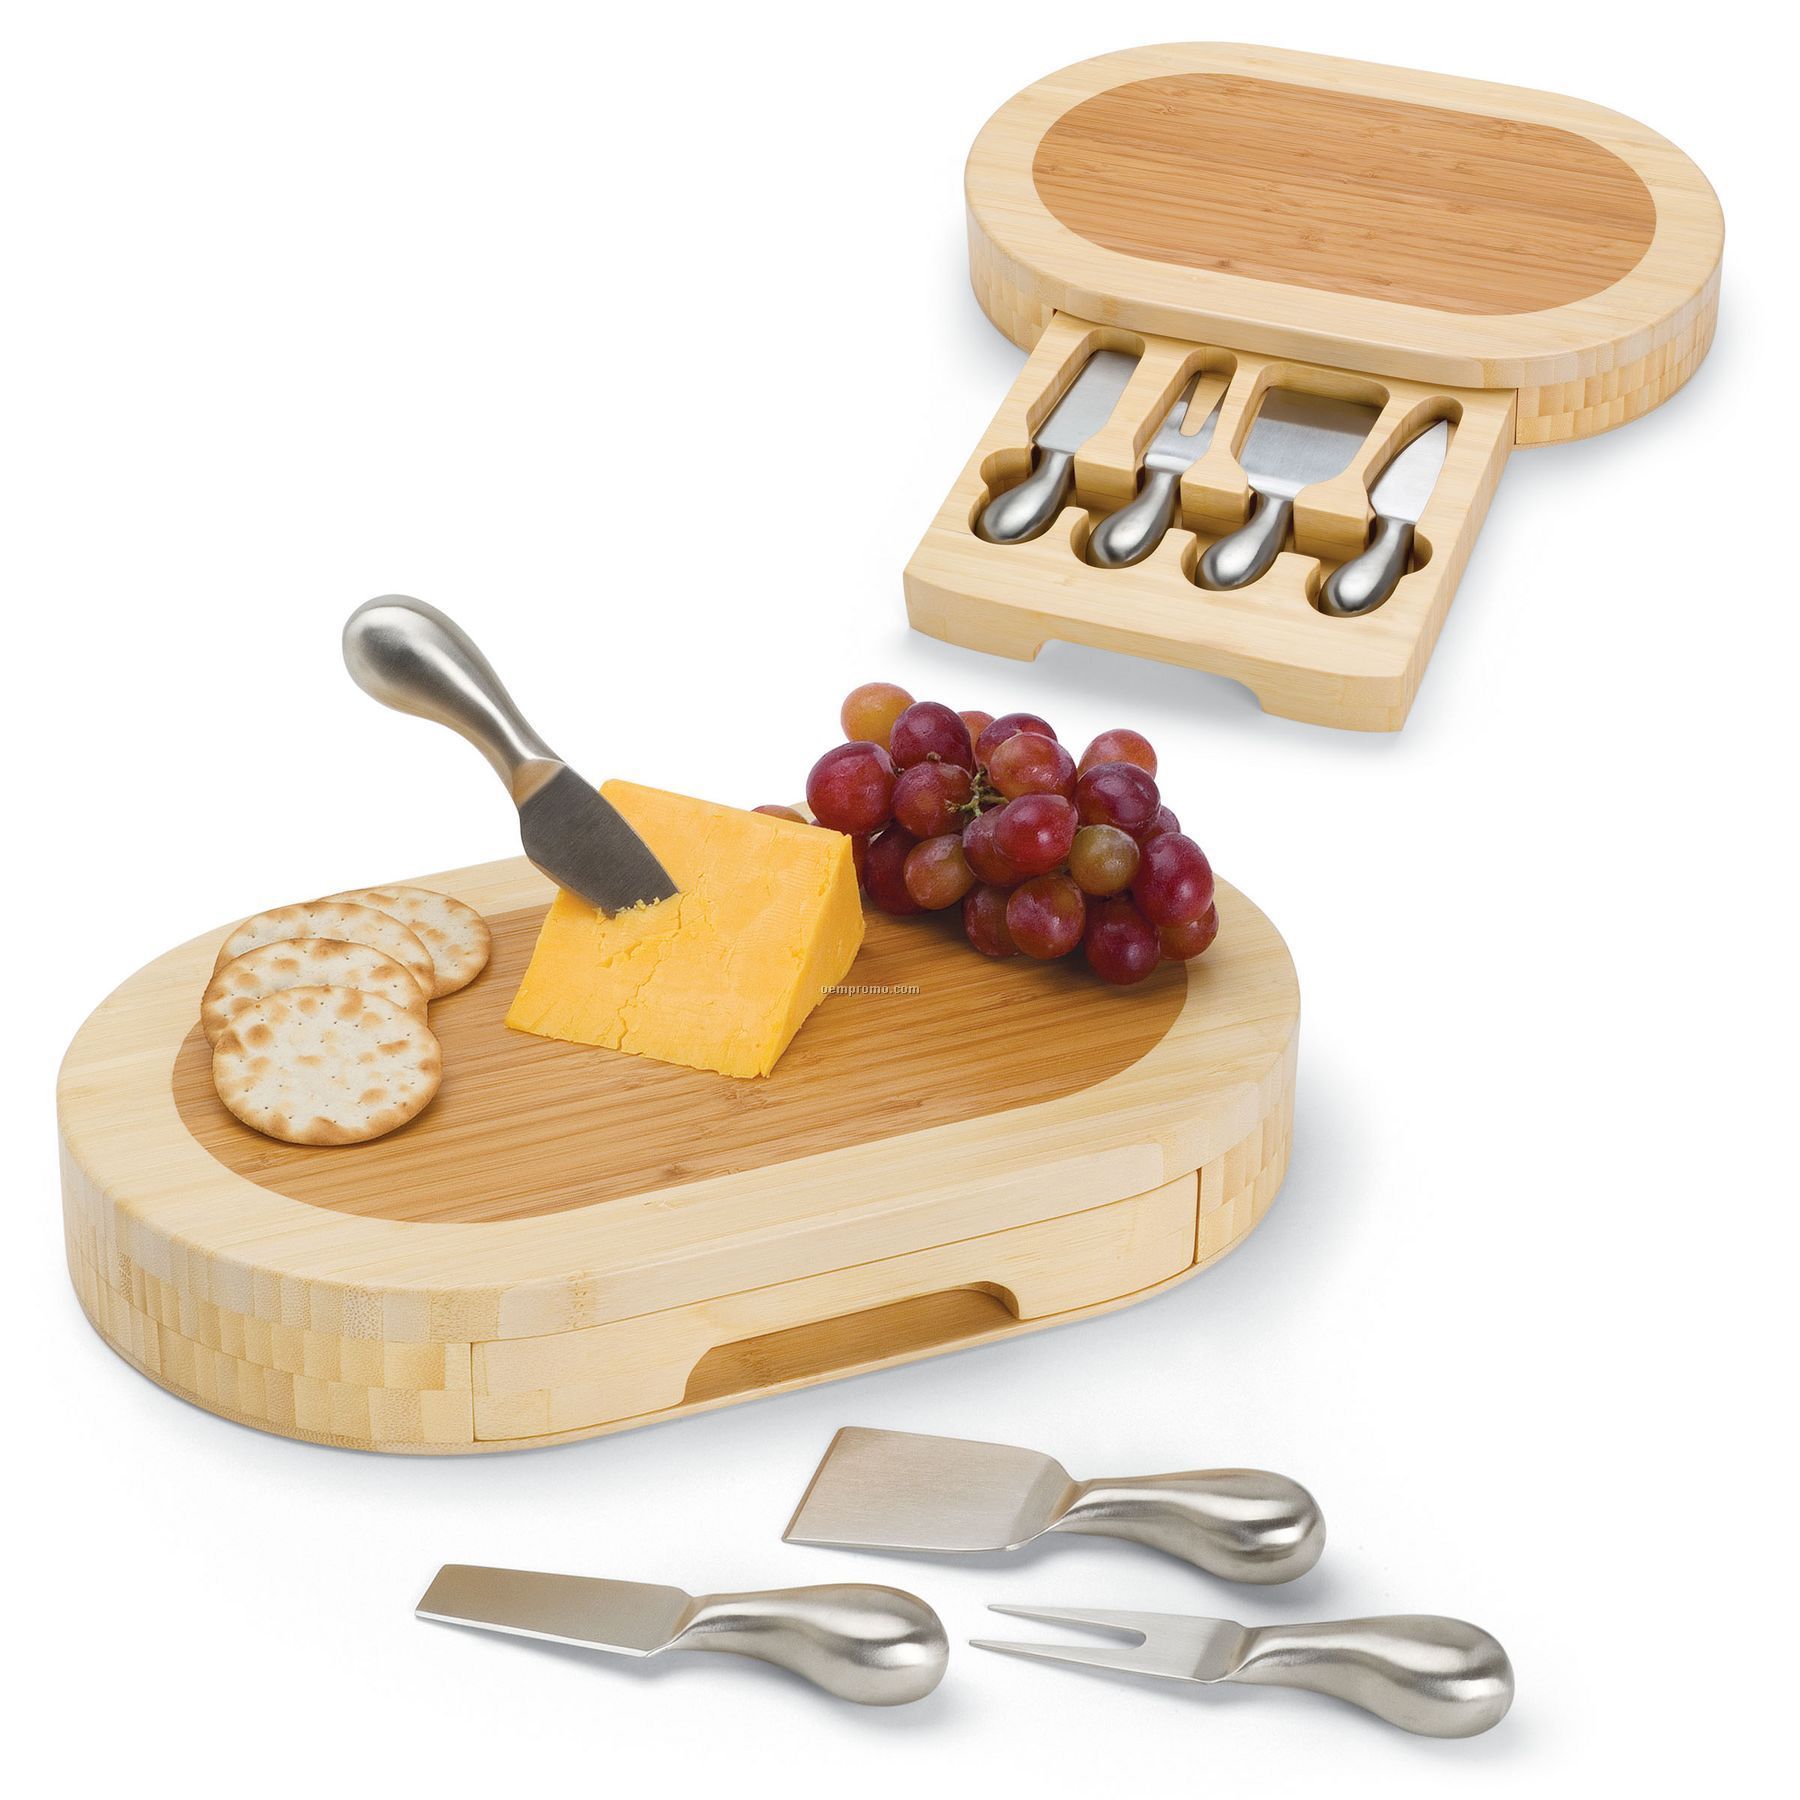 Formaggio Oval Cutting Board W/ Slide Out Drawer & 4 Cheese Tools